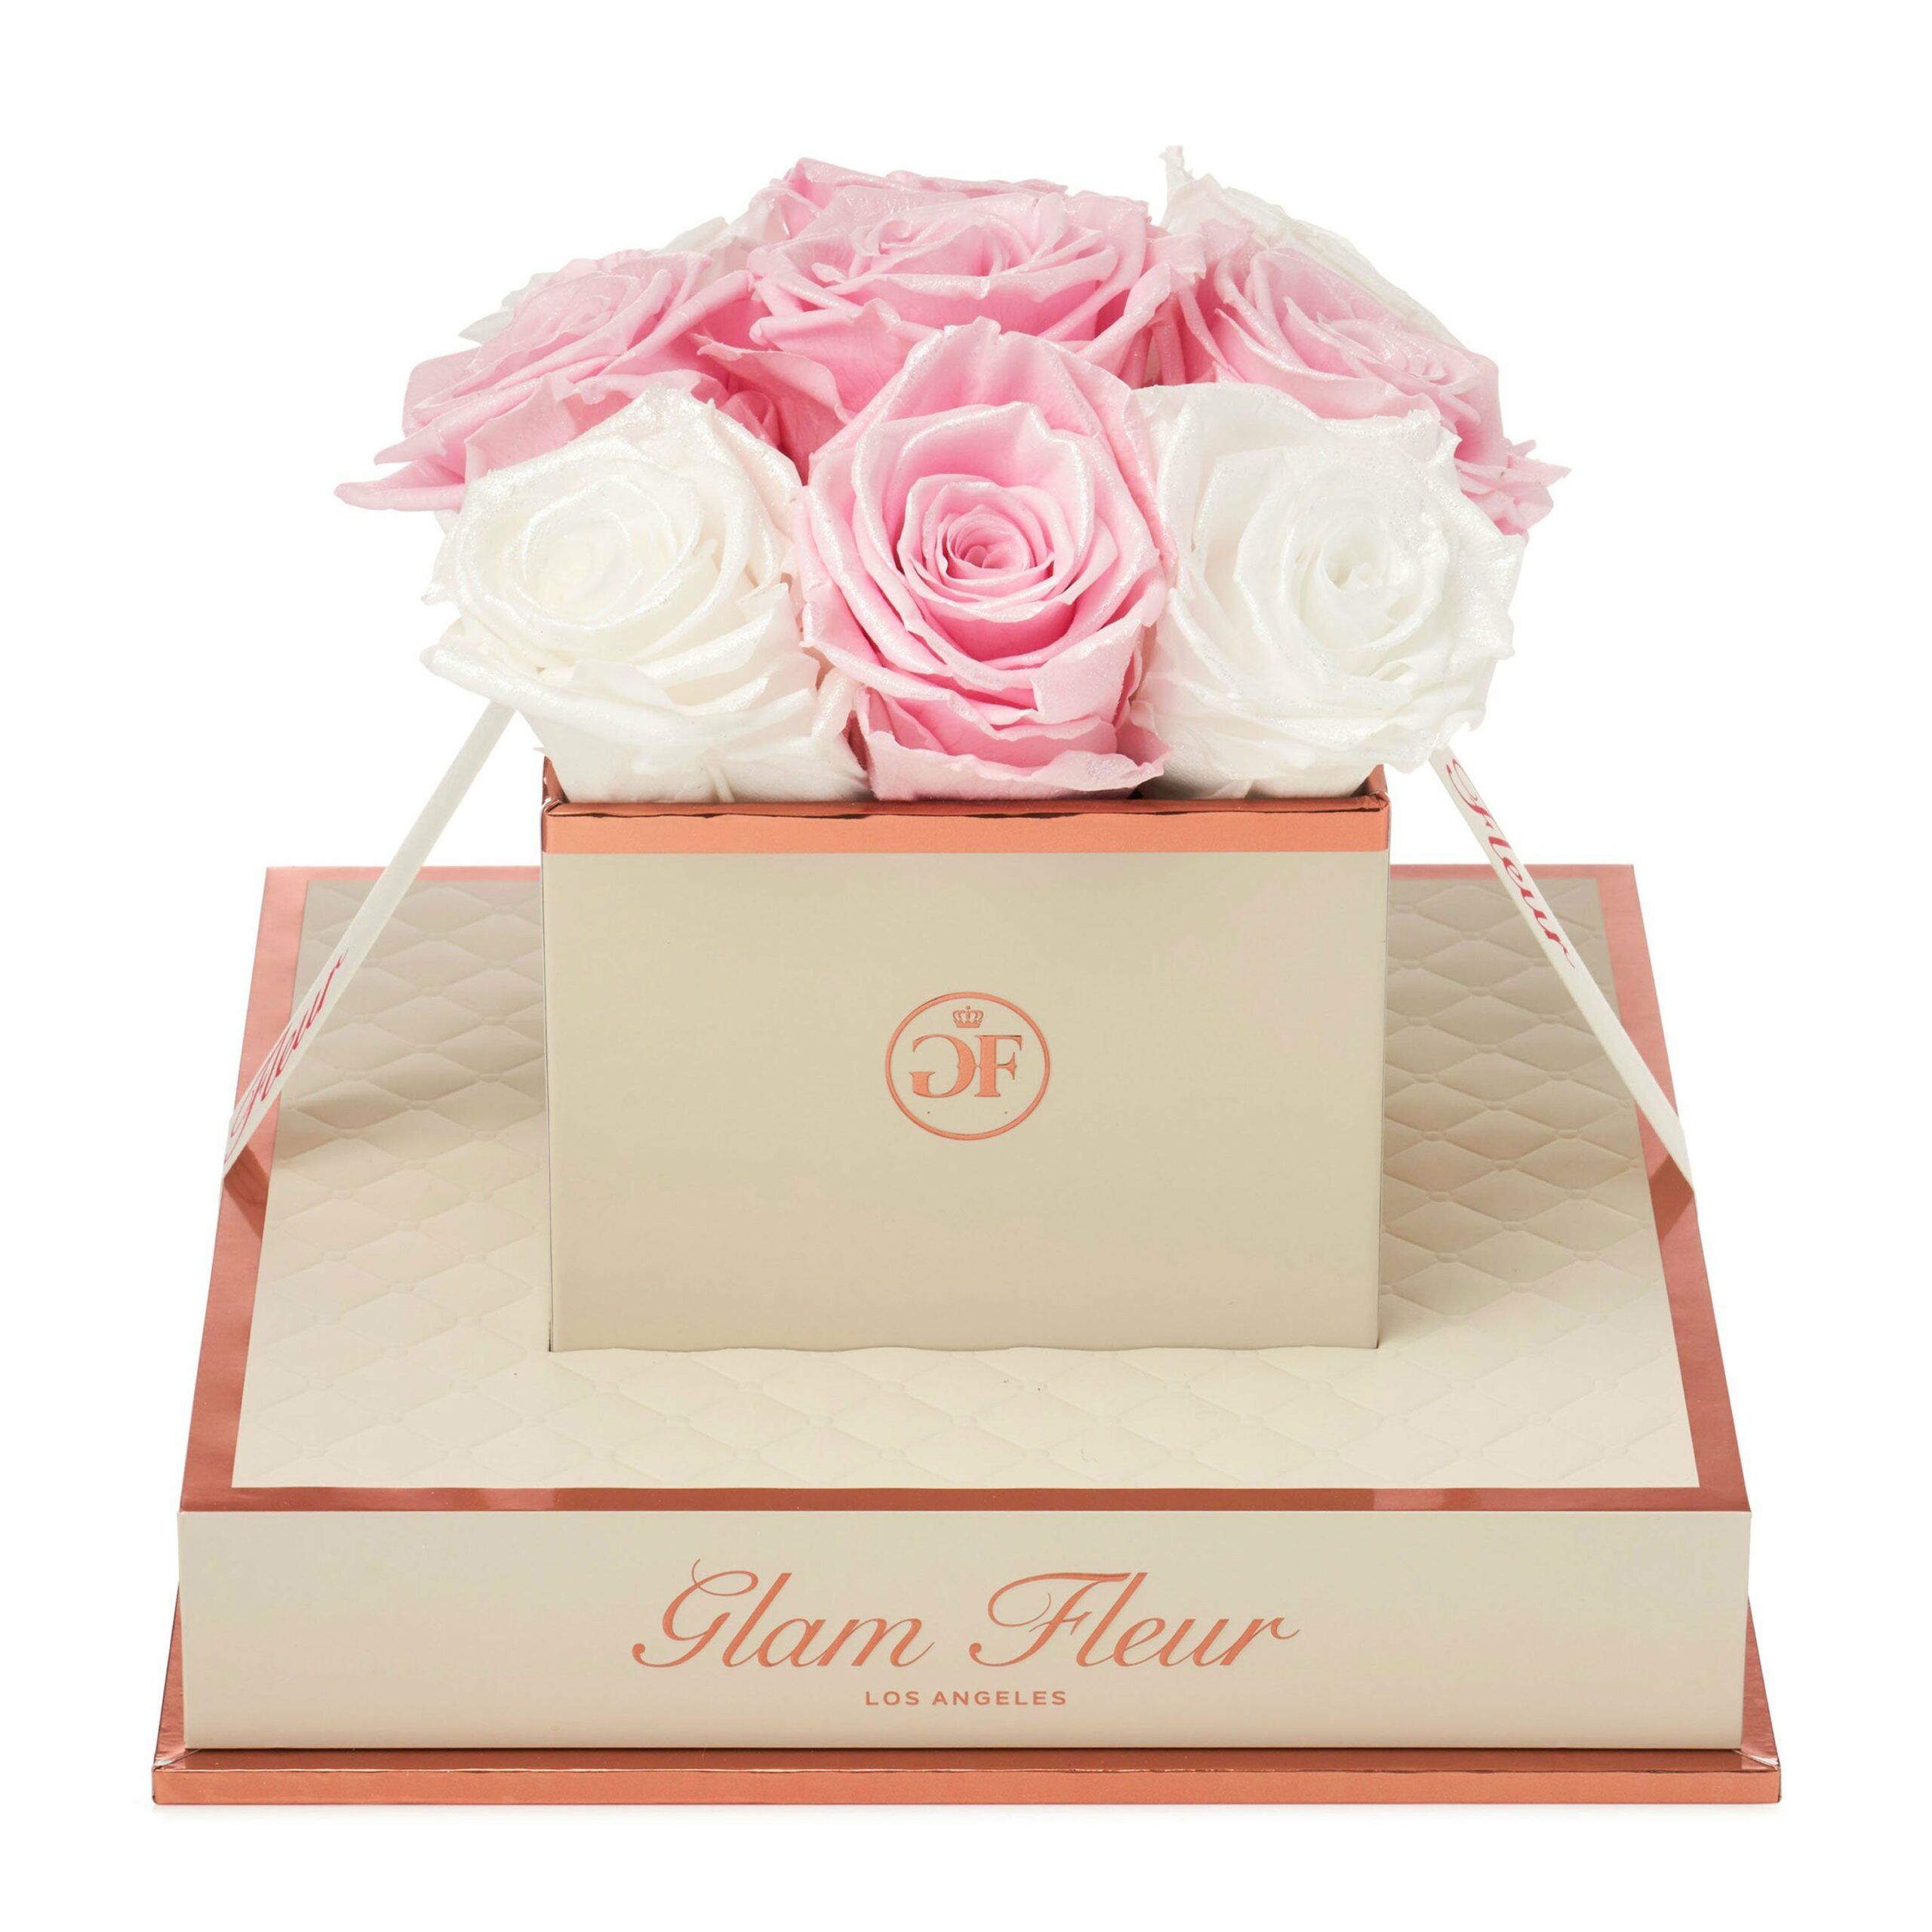 Glow Pink and Glow White Luxury Rose Bouquet